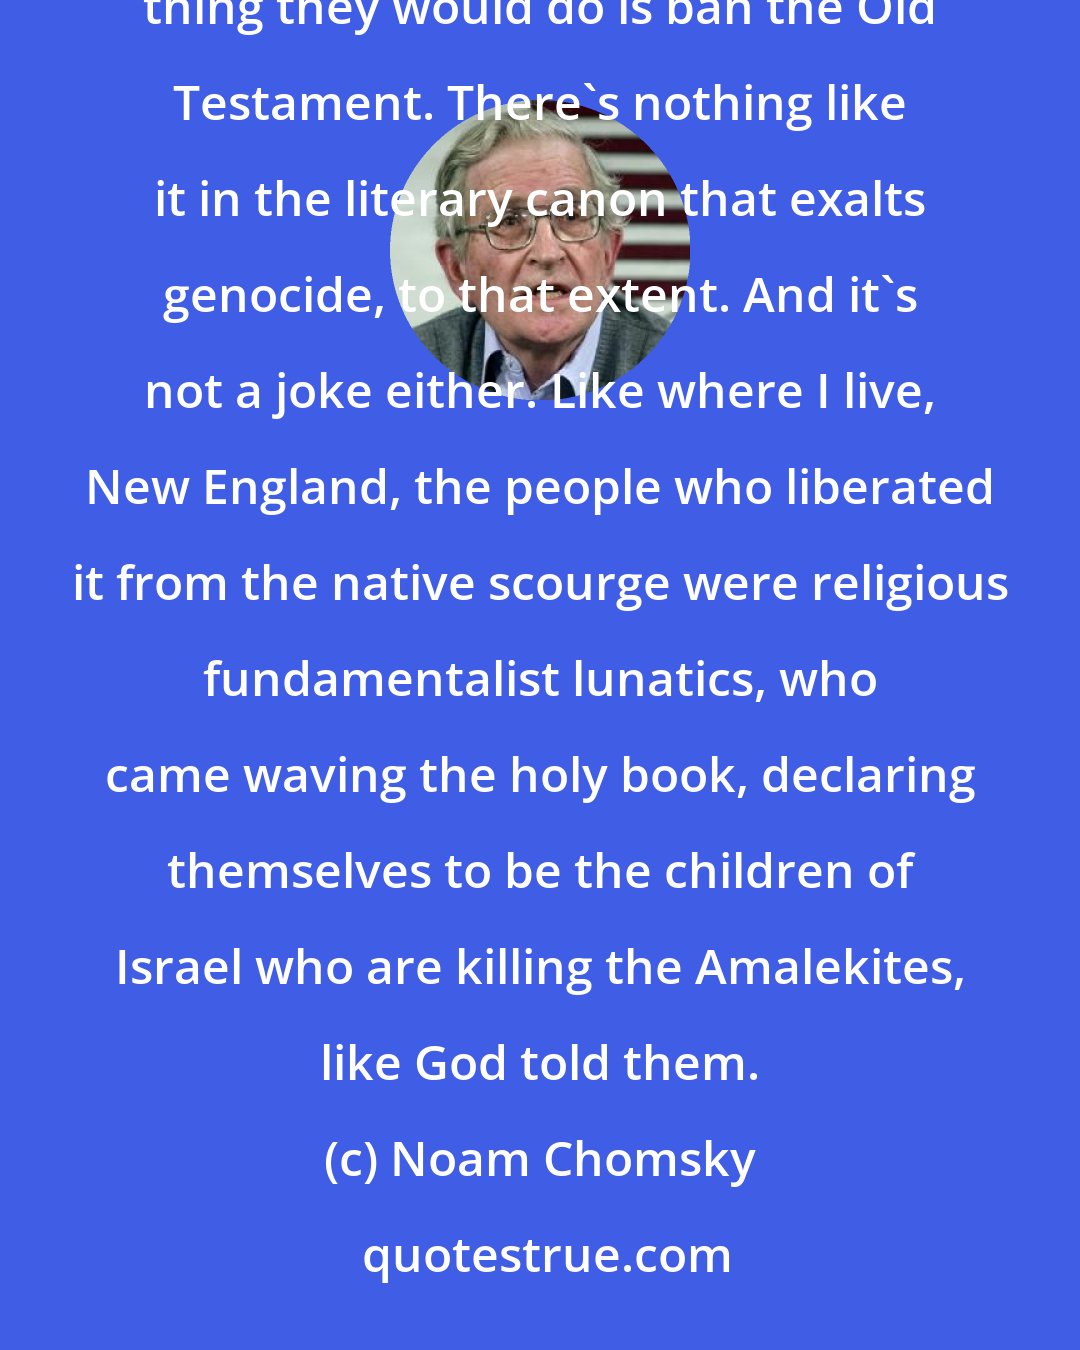 Noam Chomsky: Take any country that has laws against hate crimes, inspiring hatred and genocide and so on. The first thing they would do is ban the Old Testament. There's nothing like it in the literary canon that exalts genocide, to that extent. And it's not a joke either. Like where I live, New England, the people who liberated it from the native scourge were religious fundamentalist lunatics, who came waving the holy book, declaring themselves to be the children of Israel who are killing the Amalekites, like God told them.